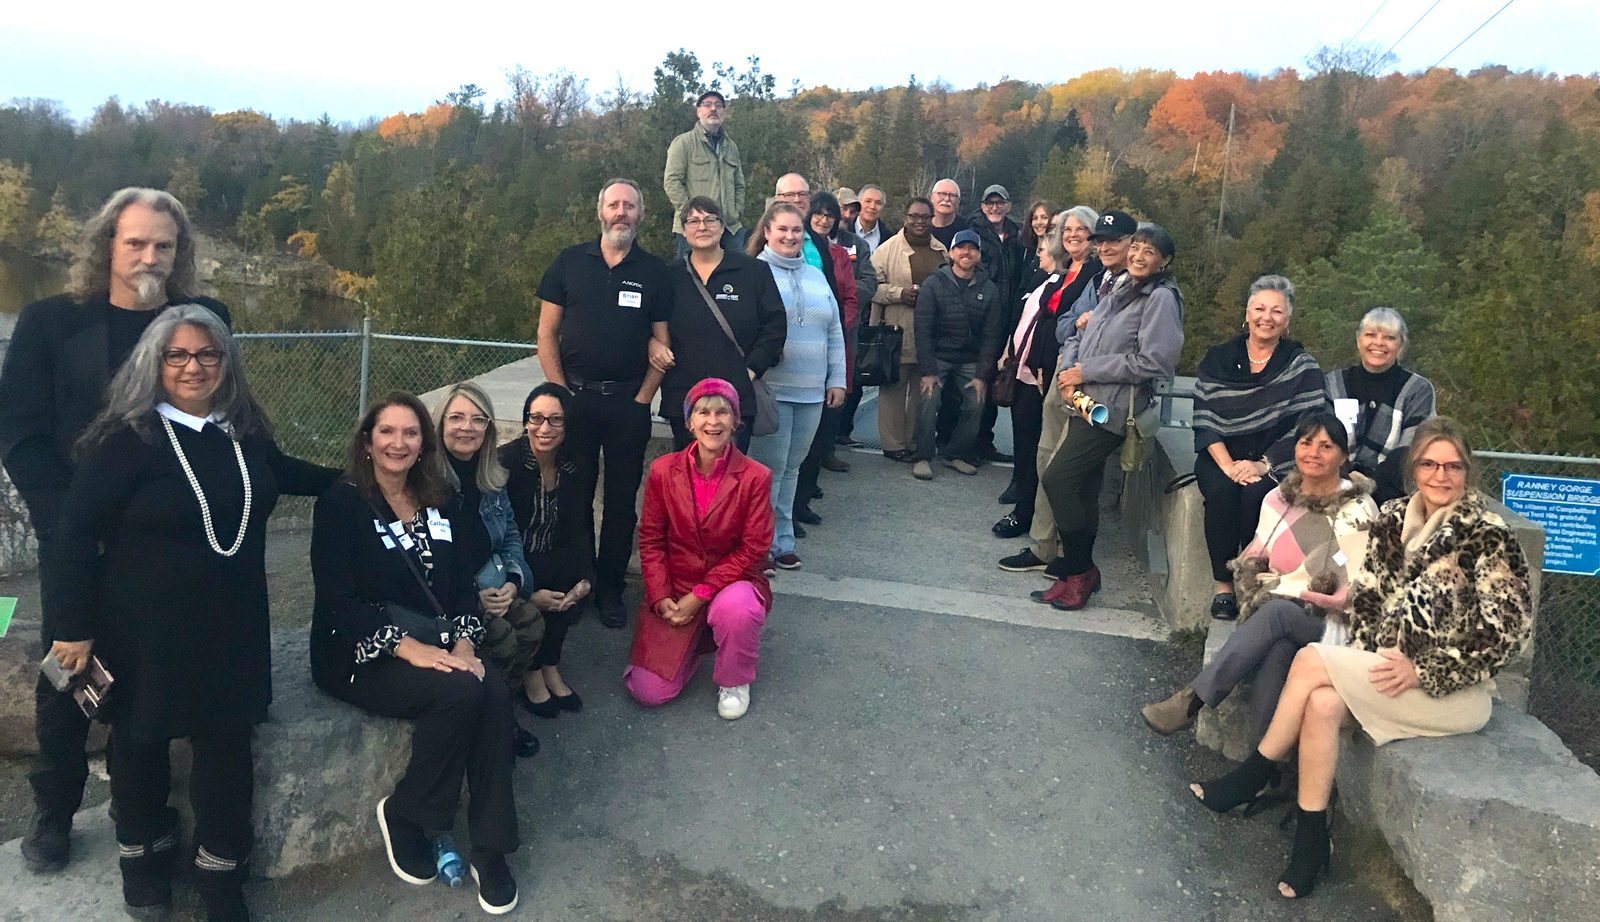 Chamber Meet and Greet Group at the Ranney Gorge Suspension Bridge